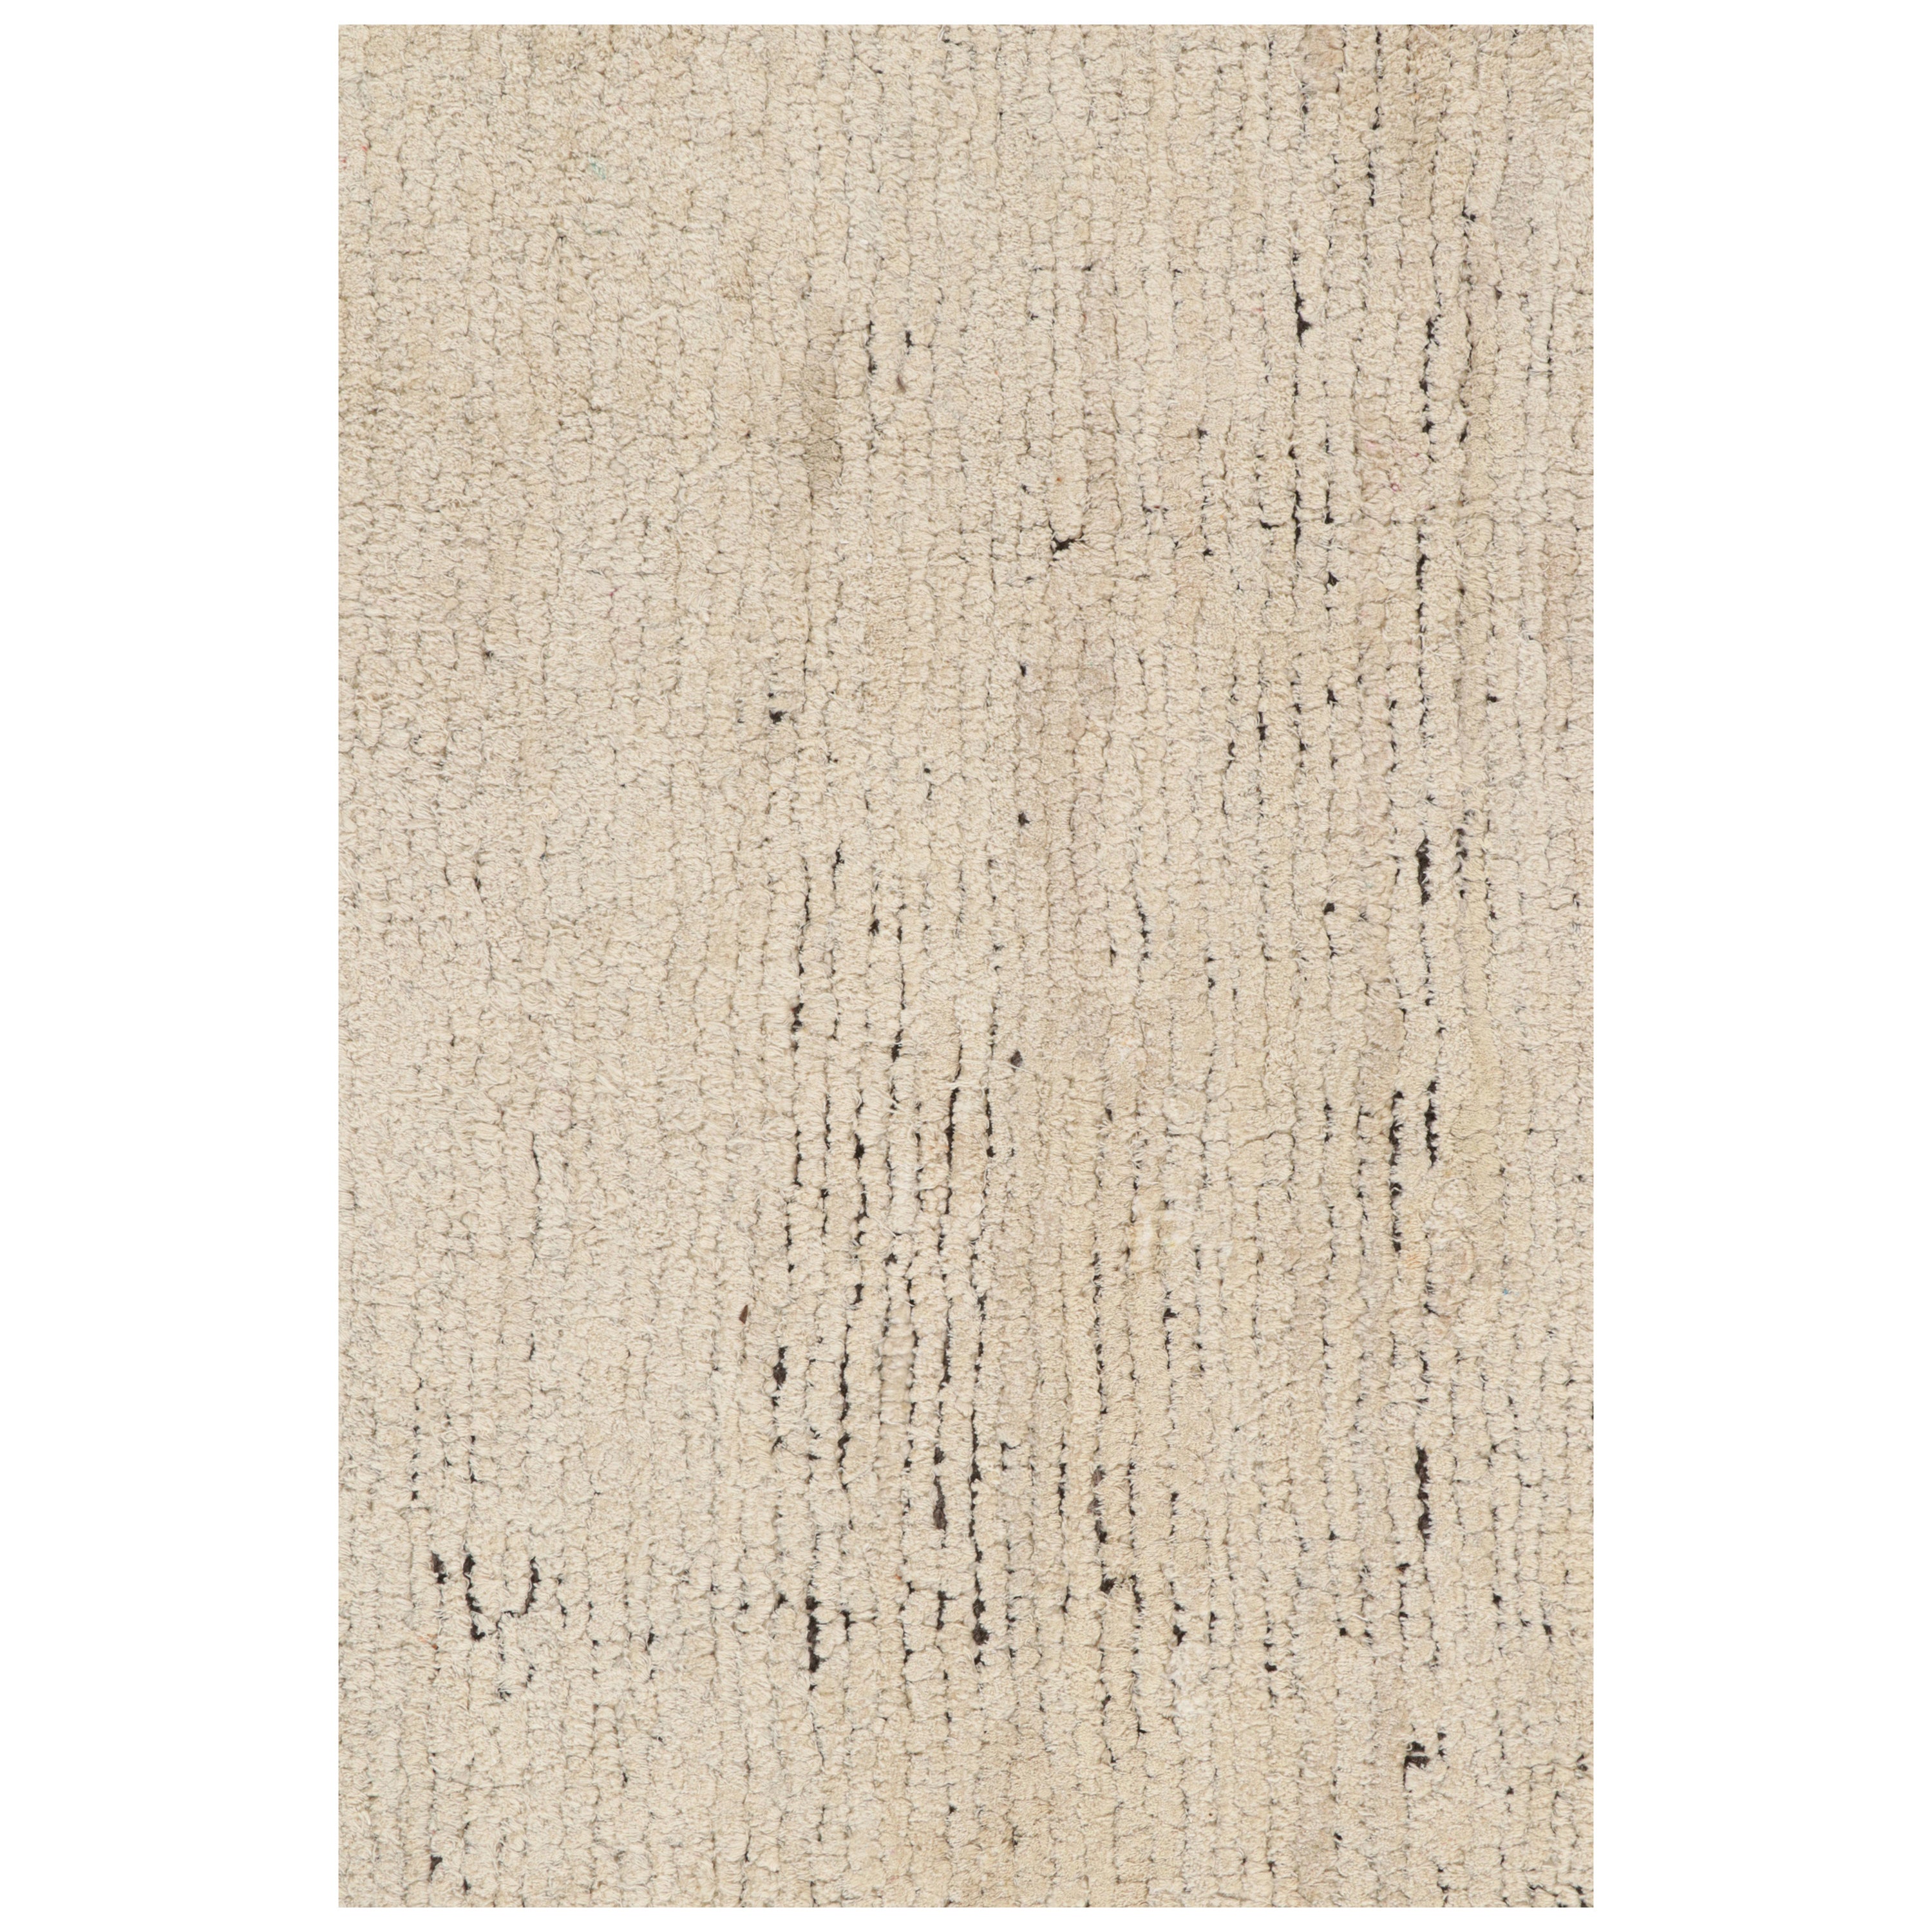 Rug & Kilim’s Contemporary Textural Runner in Beige and Off-White Tones For Sale